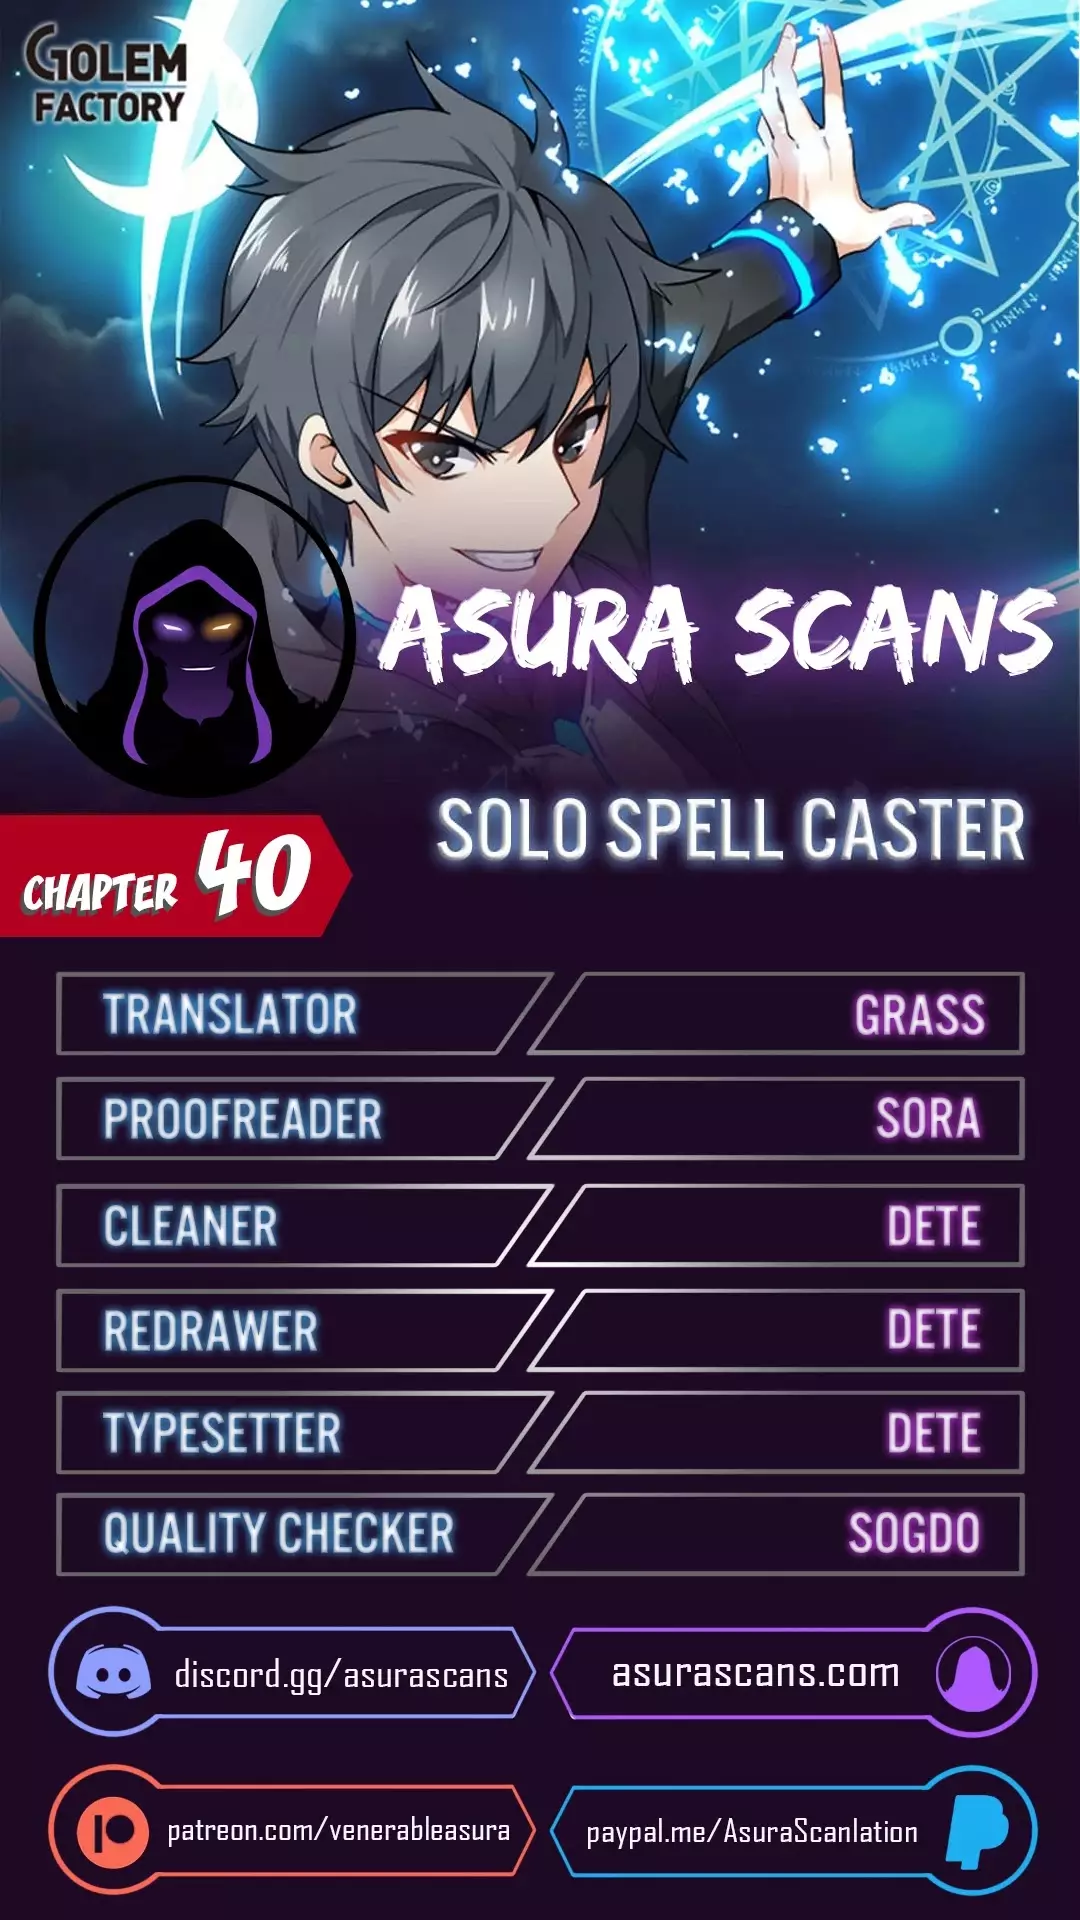 Solo Spell Caster - 40 page 1